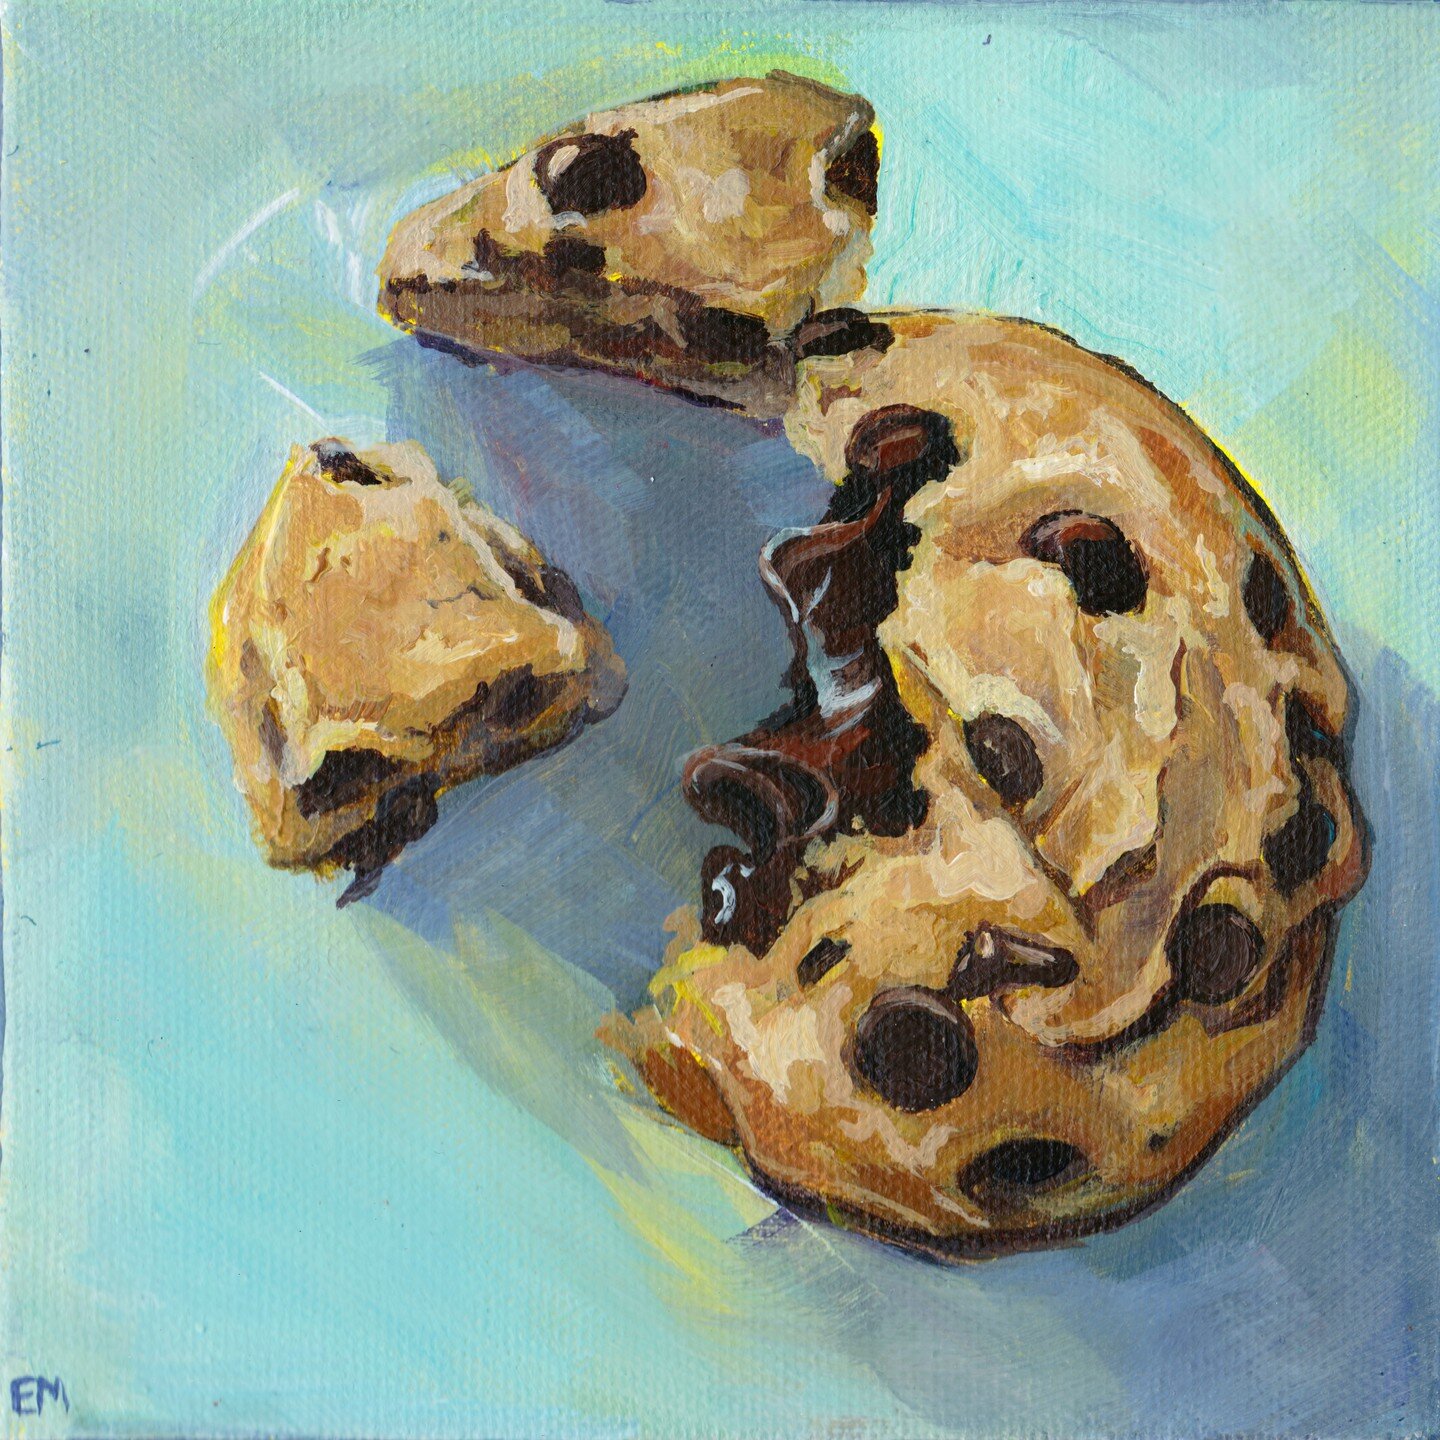 #foodpaintchallenge for this week! This one made me hungry 🍪6x6&quot; acrylic on canvas

This piece is available! Shop link in bio⭐

challenge hosted by @alaiganuza and @dennispfeil.art

#stilllife #stilllifepainting #acrylicpainting #foodart #choco